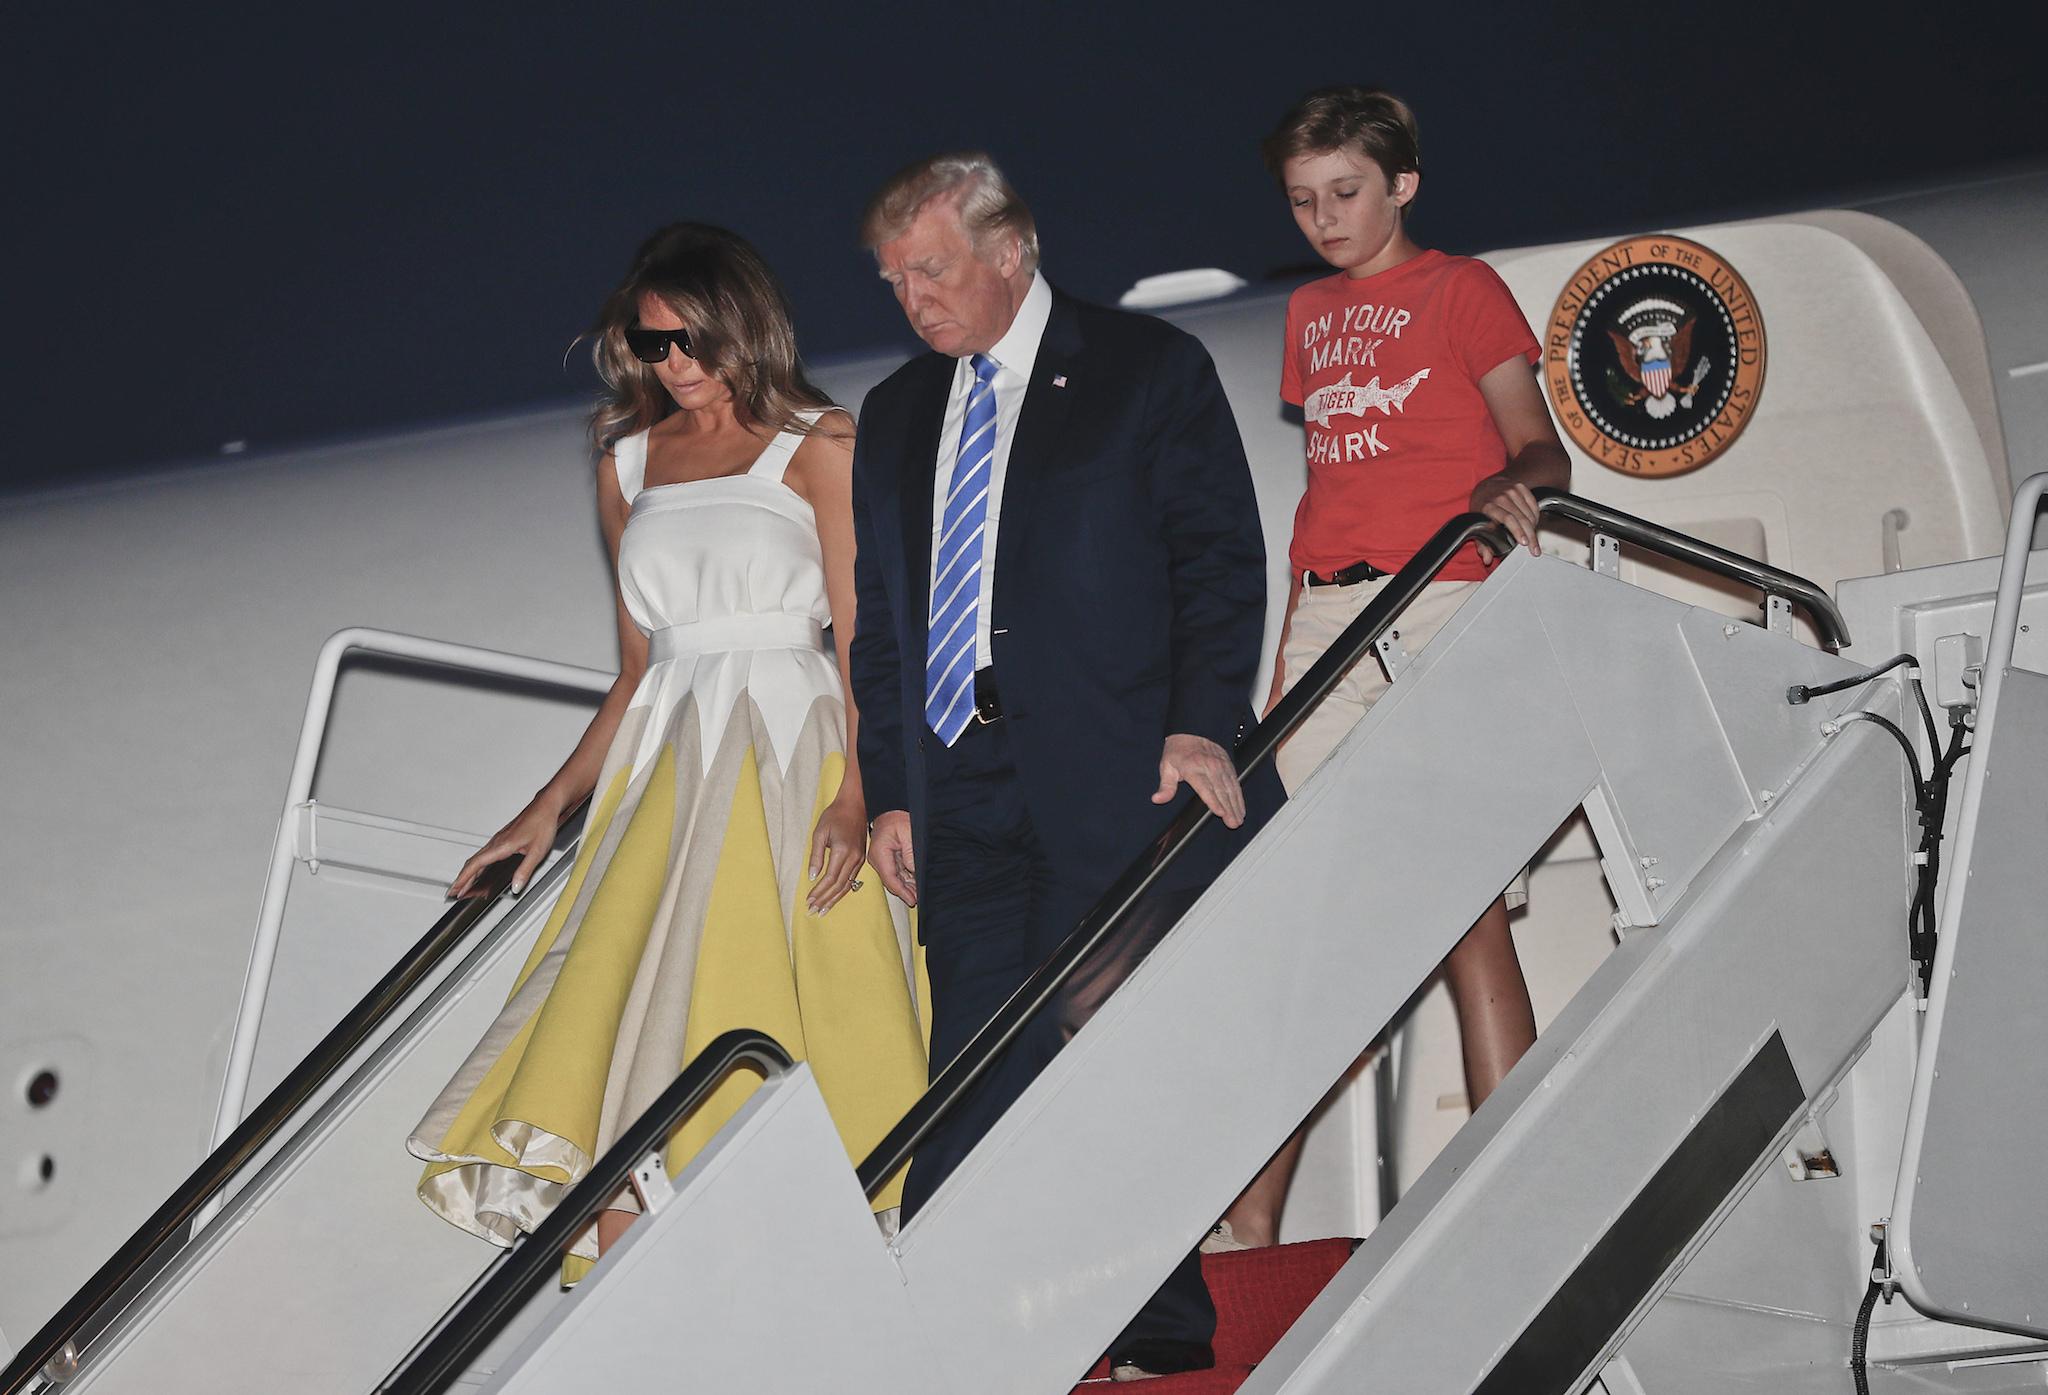 The US President arrived at Andrews Air Force Base, Maryland with first lady Melania Trump and son Barron Trump yesterday